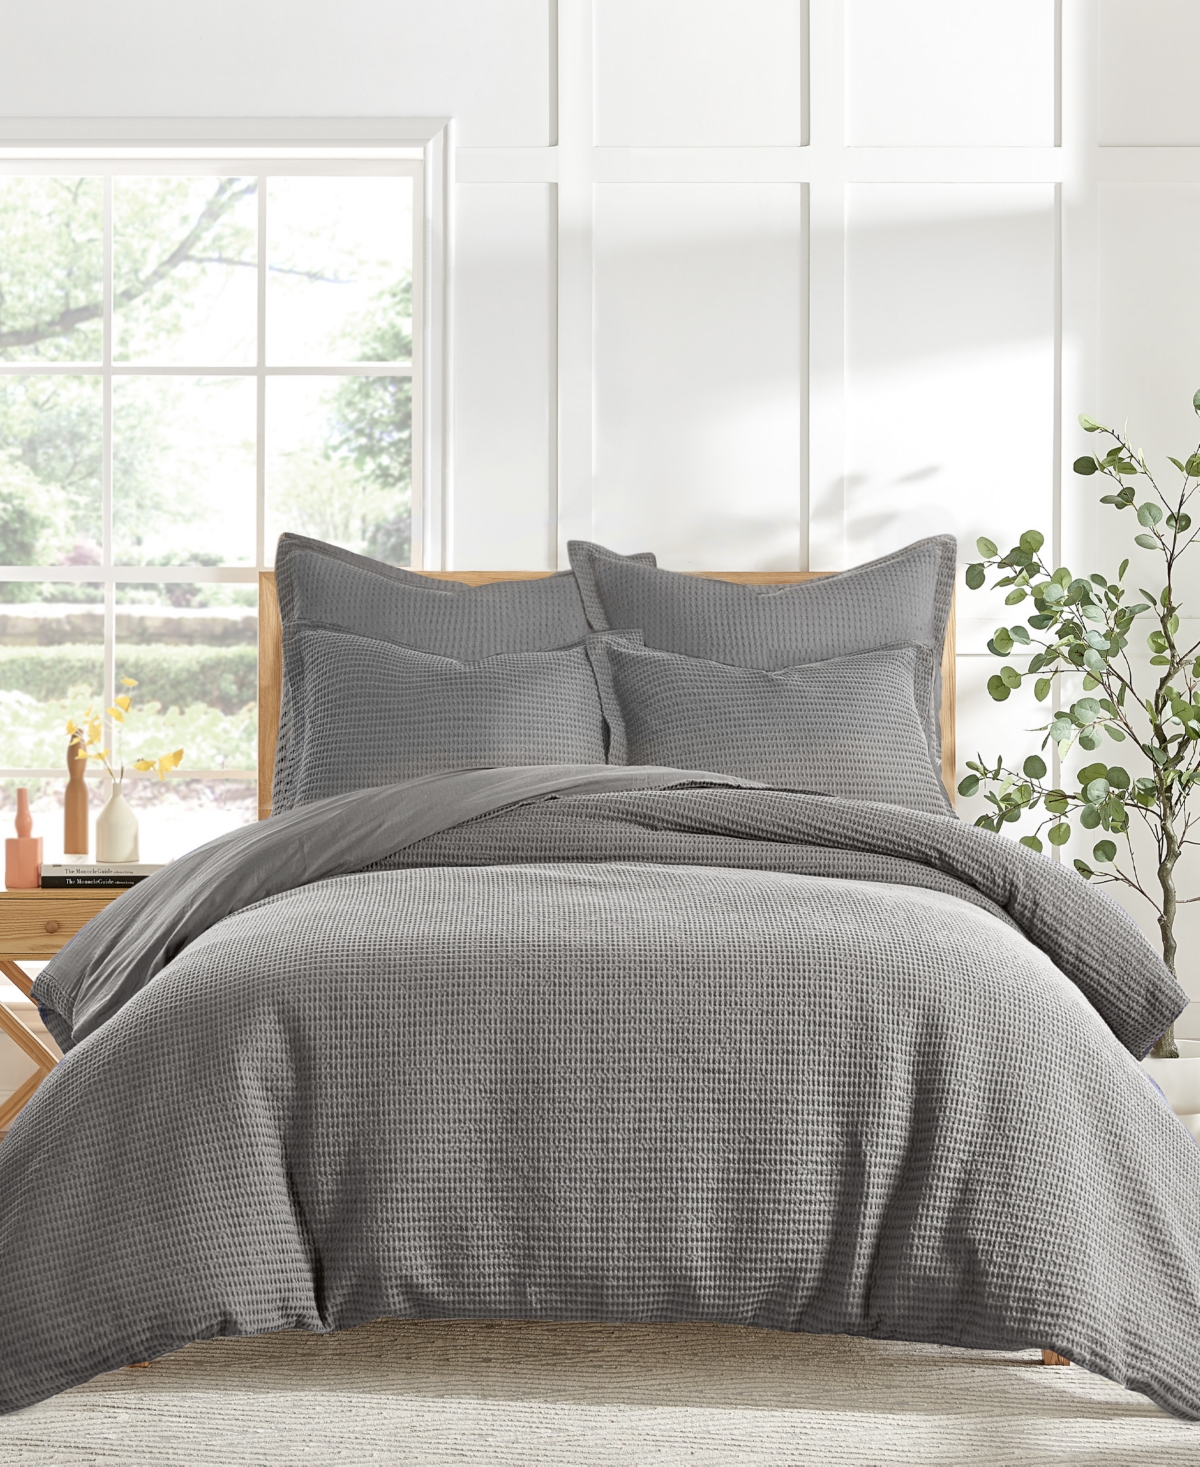 Levtex Cloud Waffle Textured 2-pc. Duvet Cover Set, Twin/twin Xl In Grey